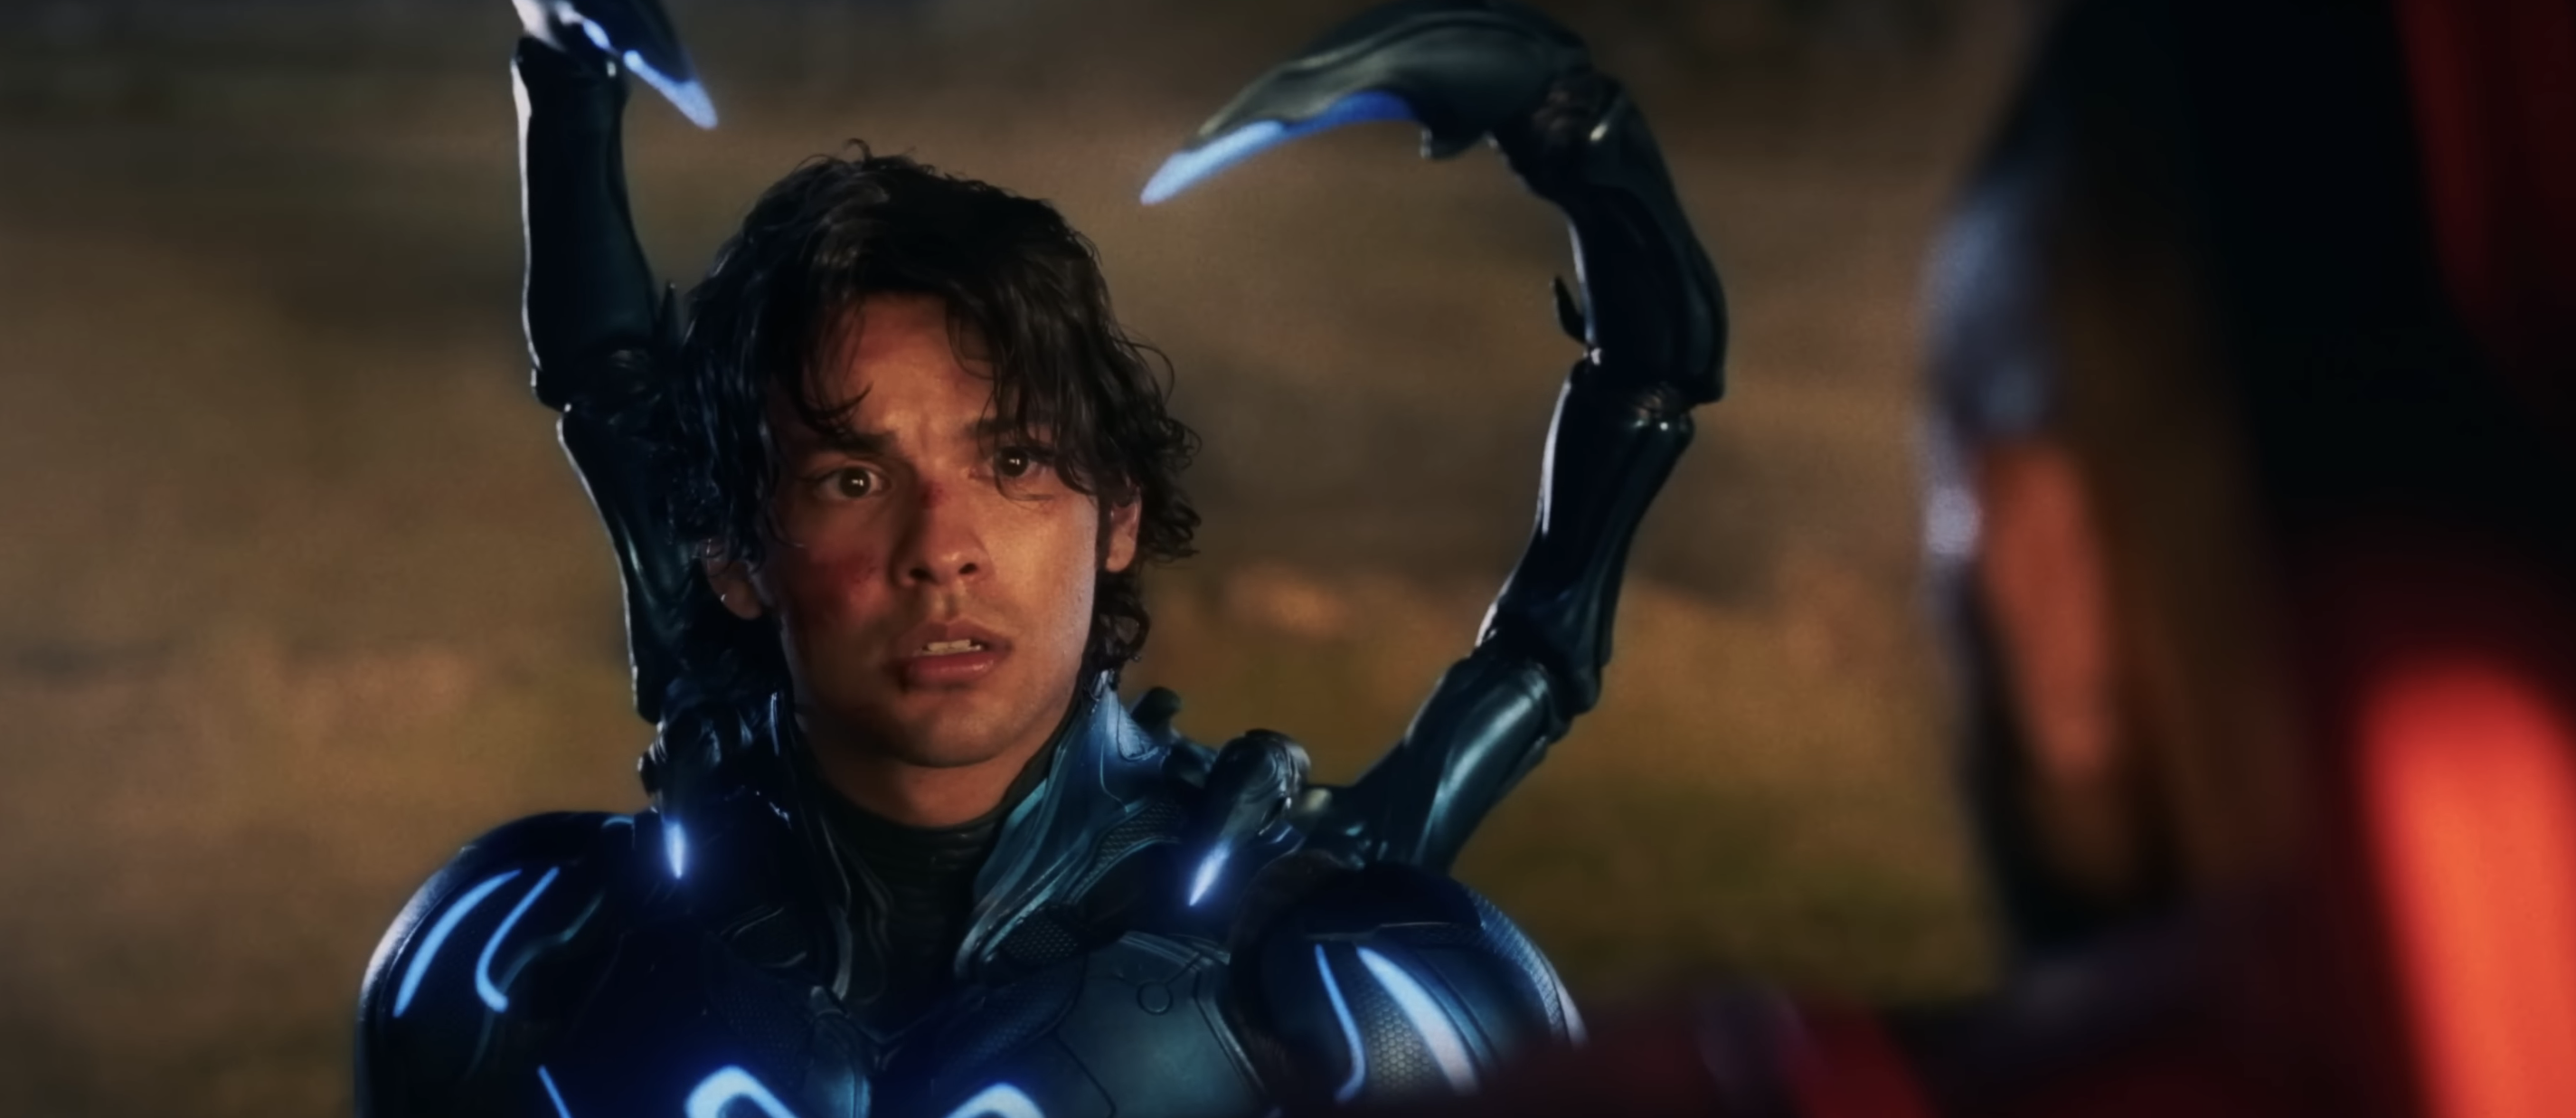 Trailer for Blue Beetle has been released online